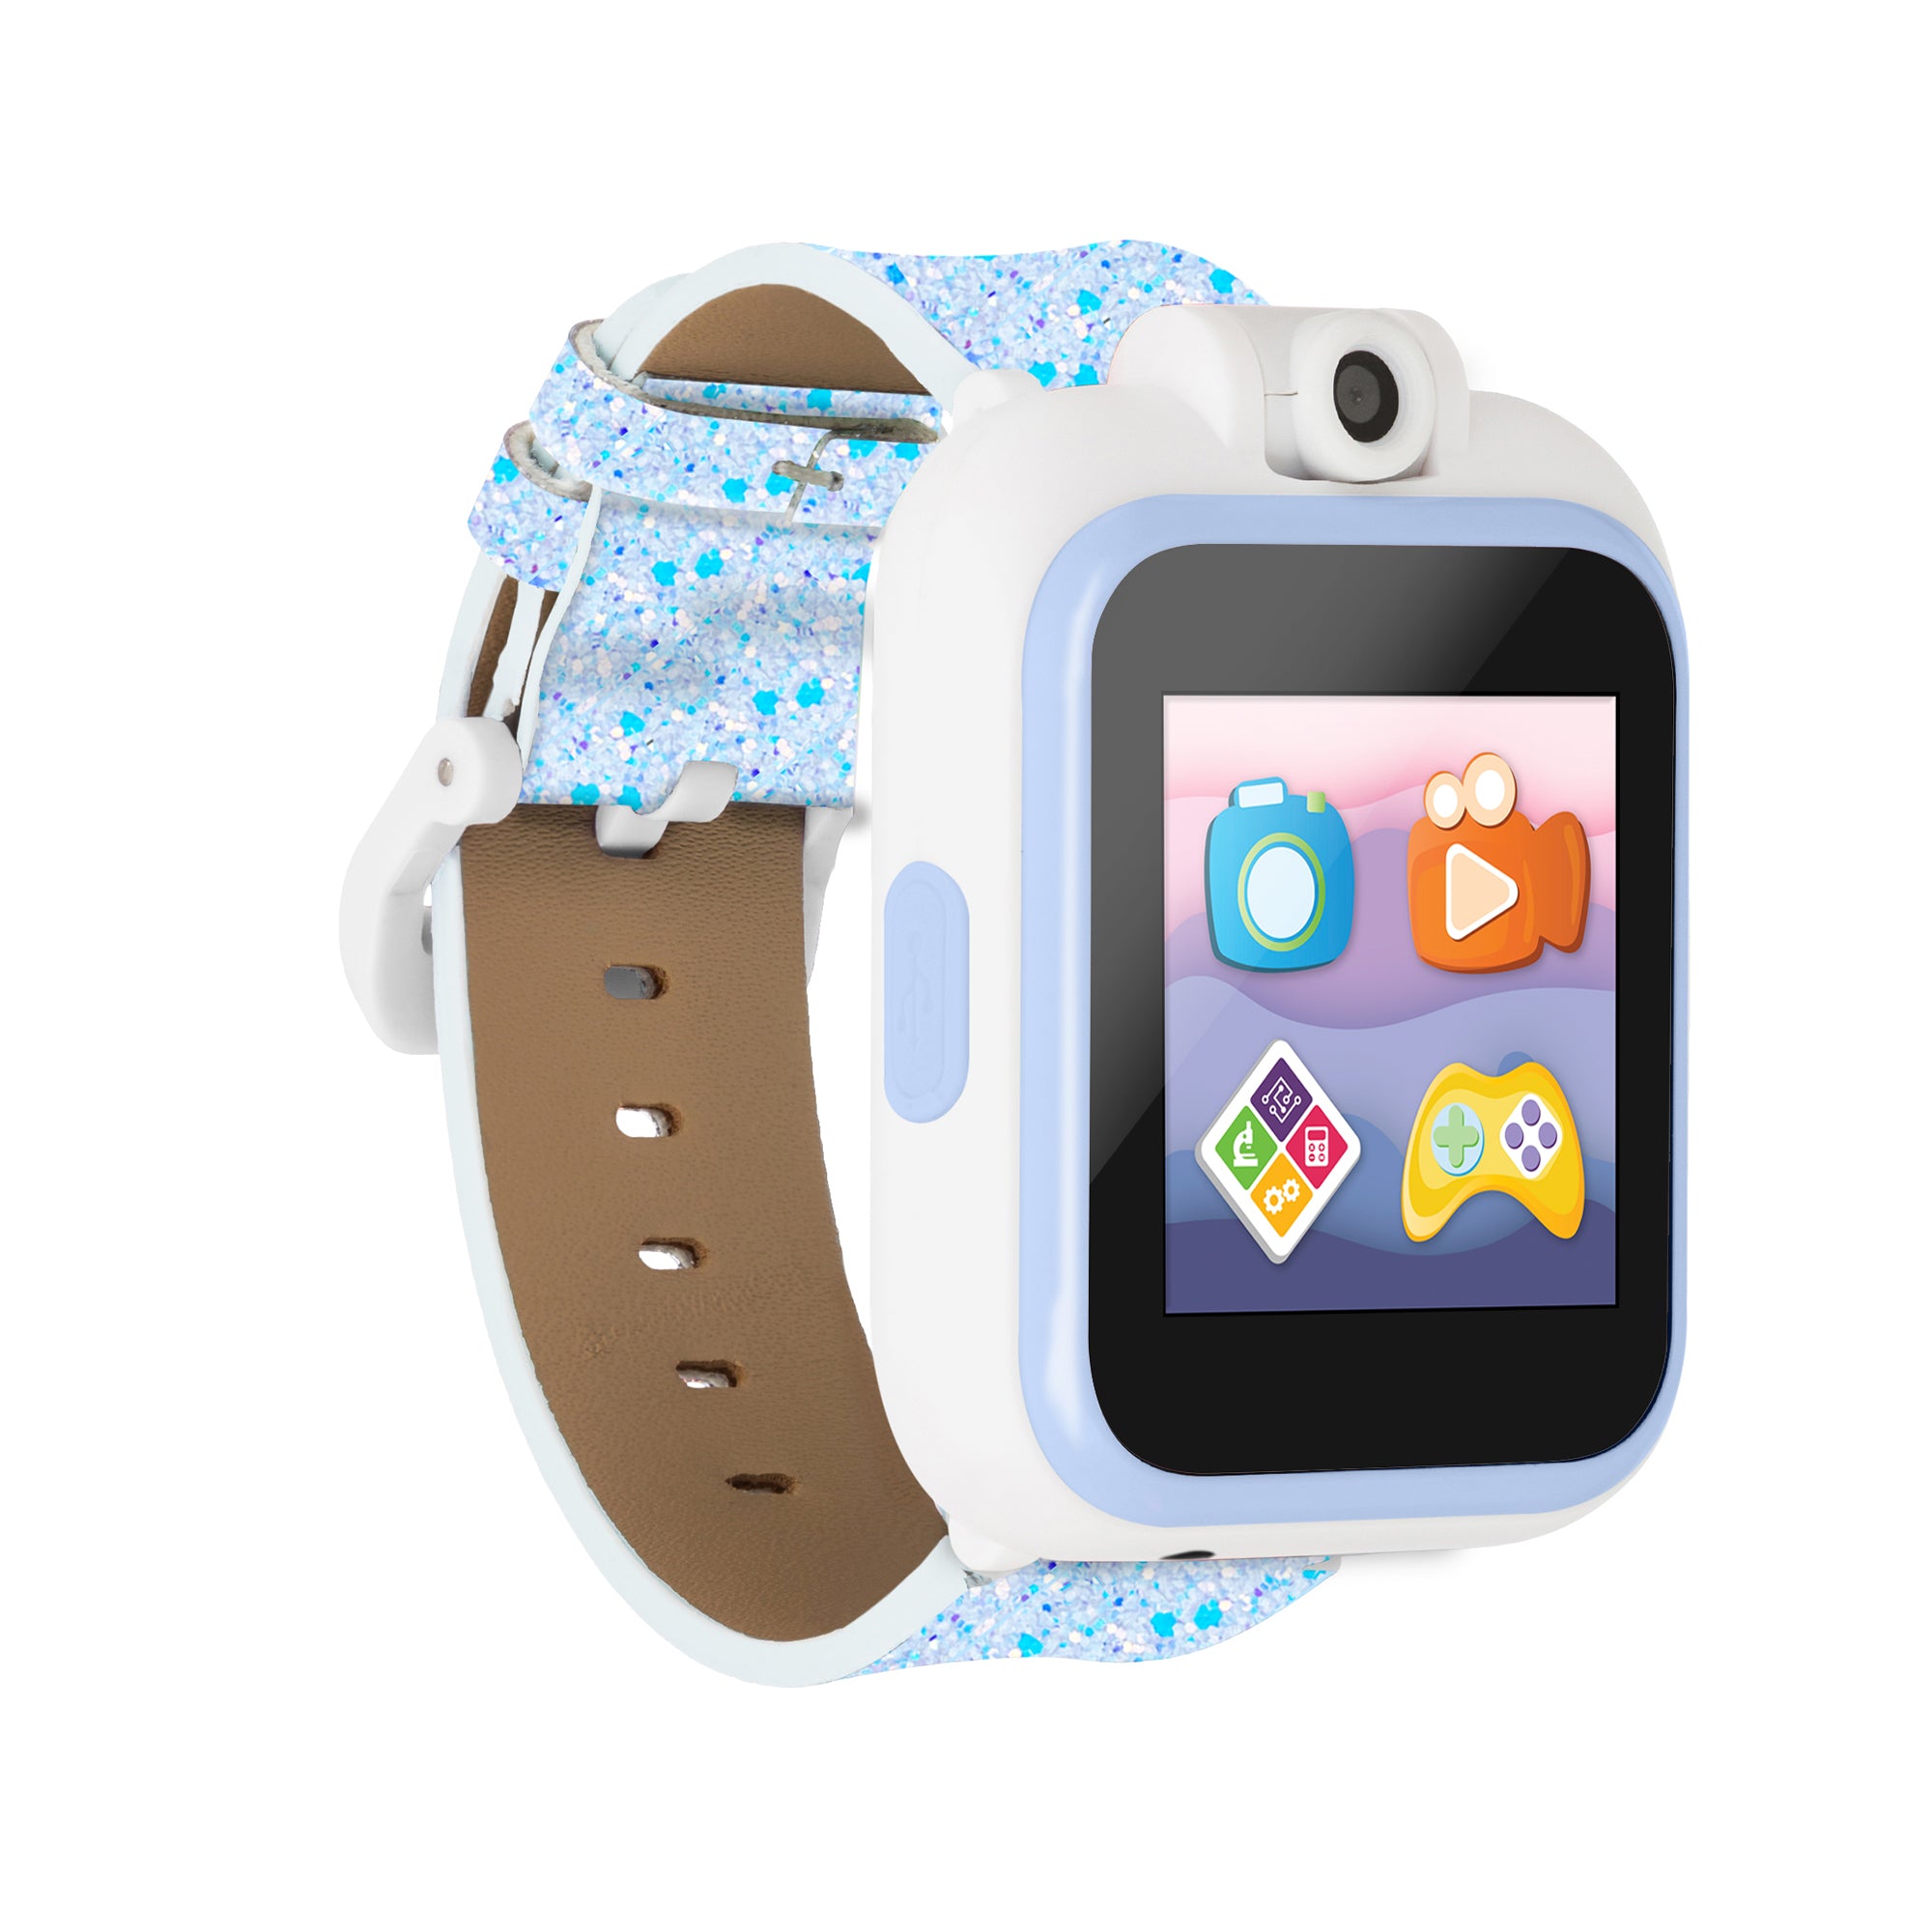 PlayZoom 2 Kids Smartwatch with Headphones: Light Blue Sparkle affordable smart watch with headphones